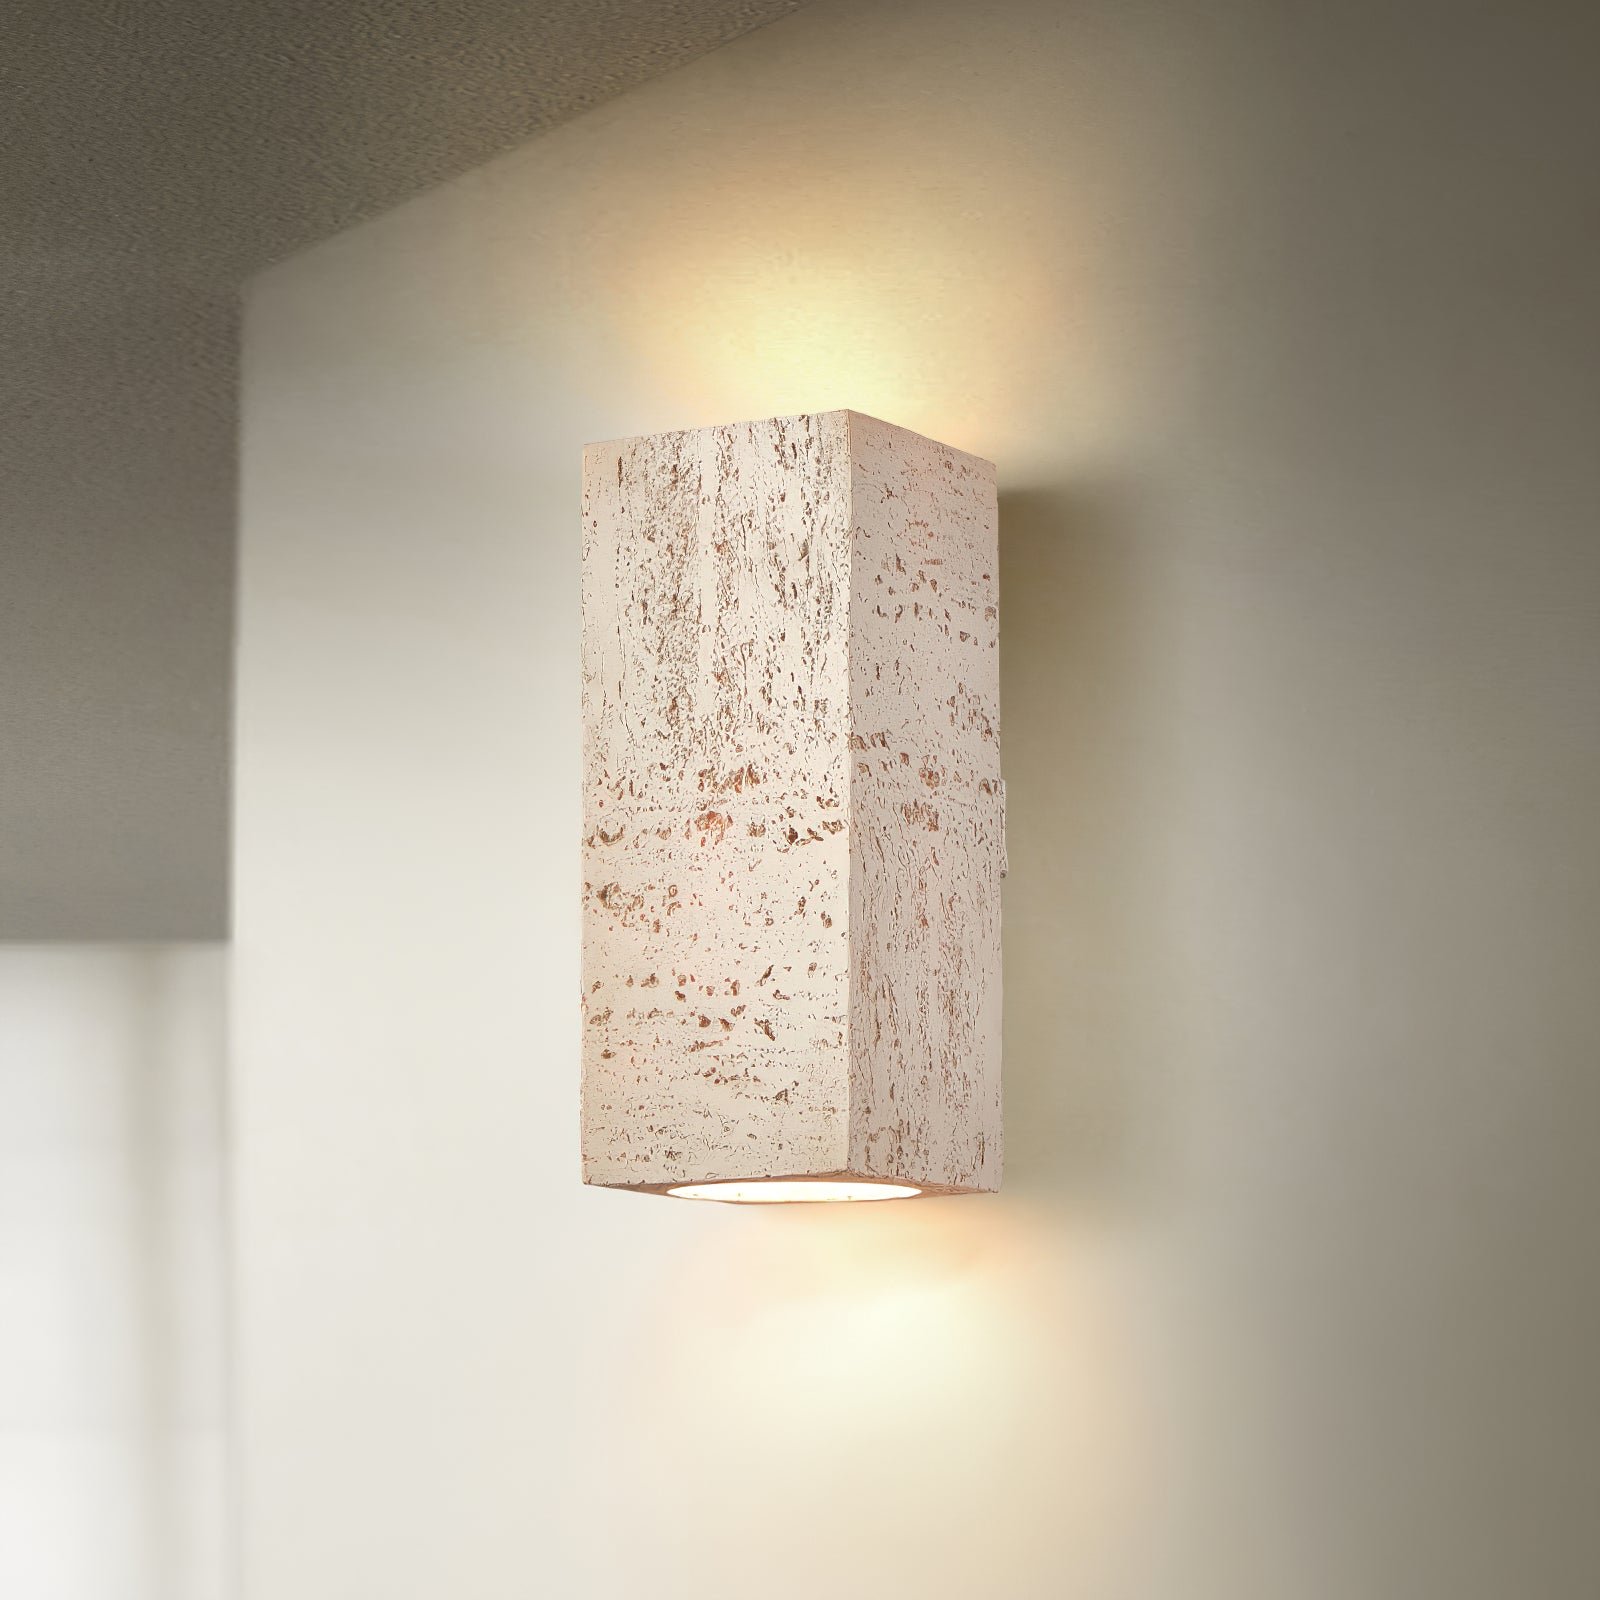 White Bricks Wall Lamp with dimensions of 3.9" diameter x 9" height (10cm diameter x 23cm height)